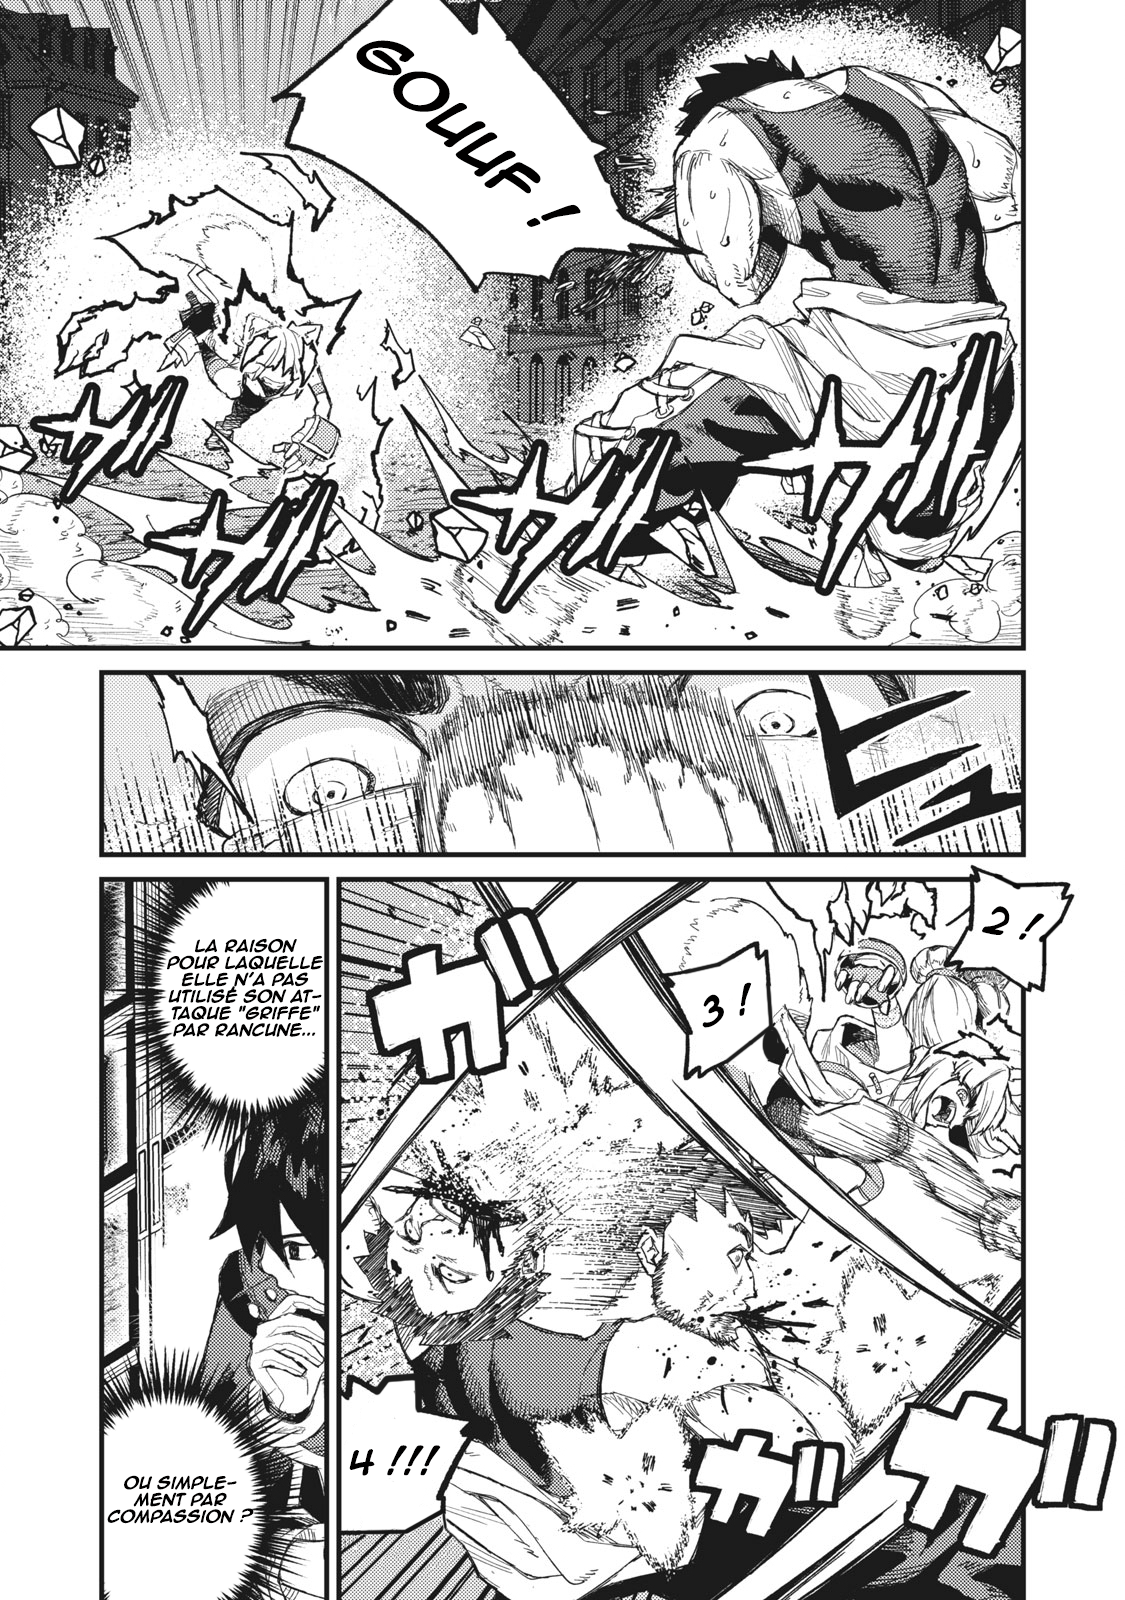 Skill Lender's Retrieving (Tale) ～I Told You It's 10% Per 10 Days At First, Didn't I～: Chapter 8 - Page 1